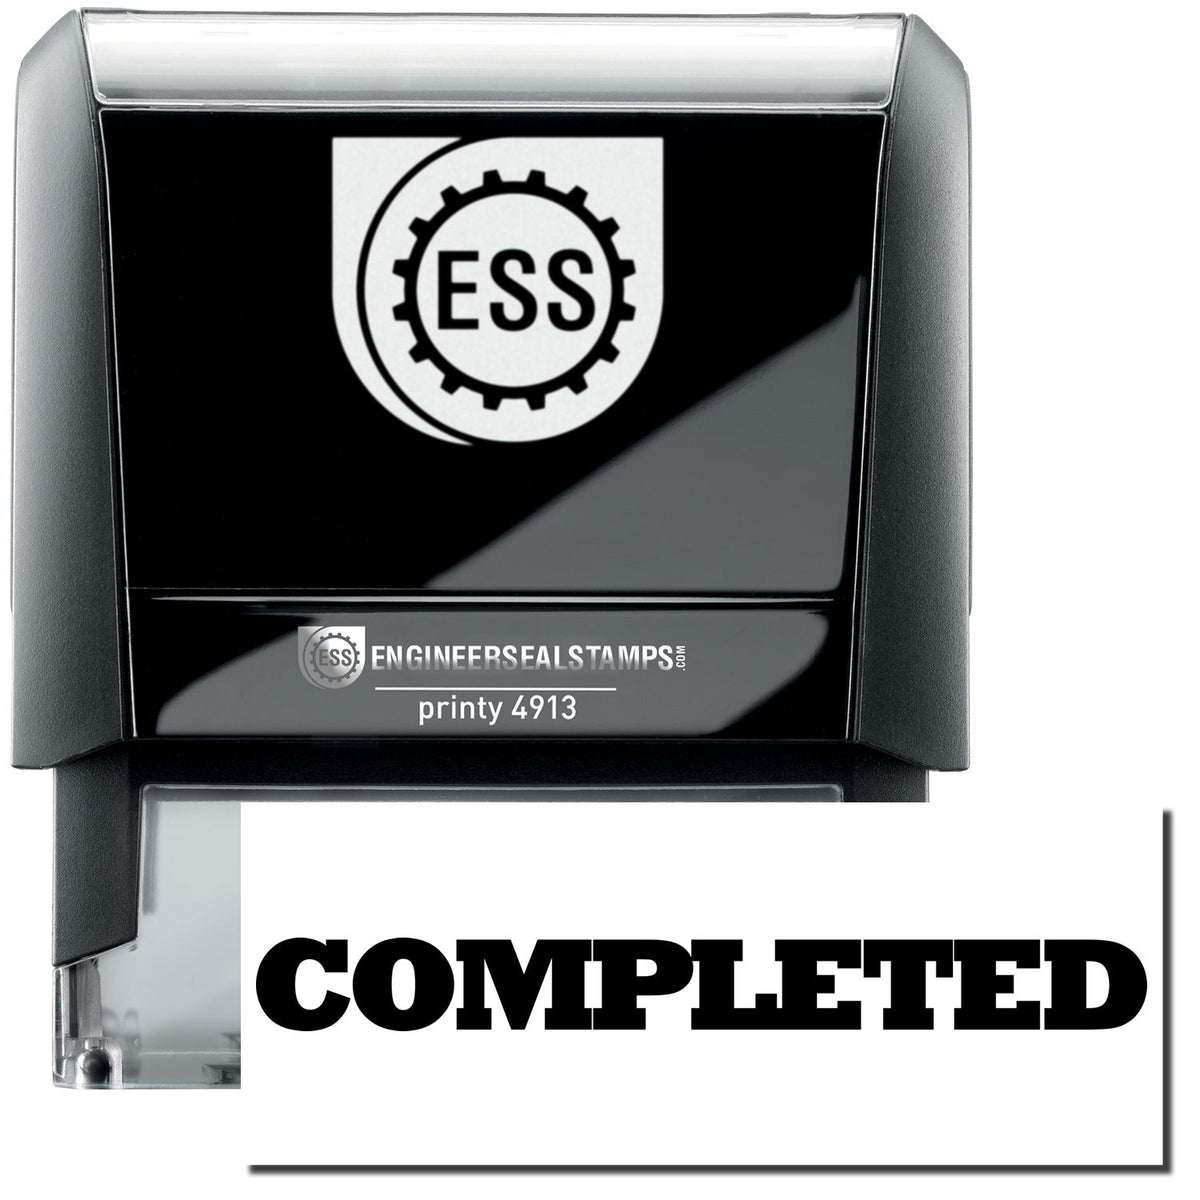 A self-inking stamp with a stamped image showing how the text &quot;COMPLETED&quot; in a large bold font is displayed by it after stamping.